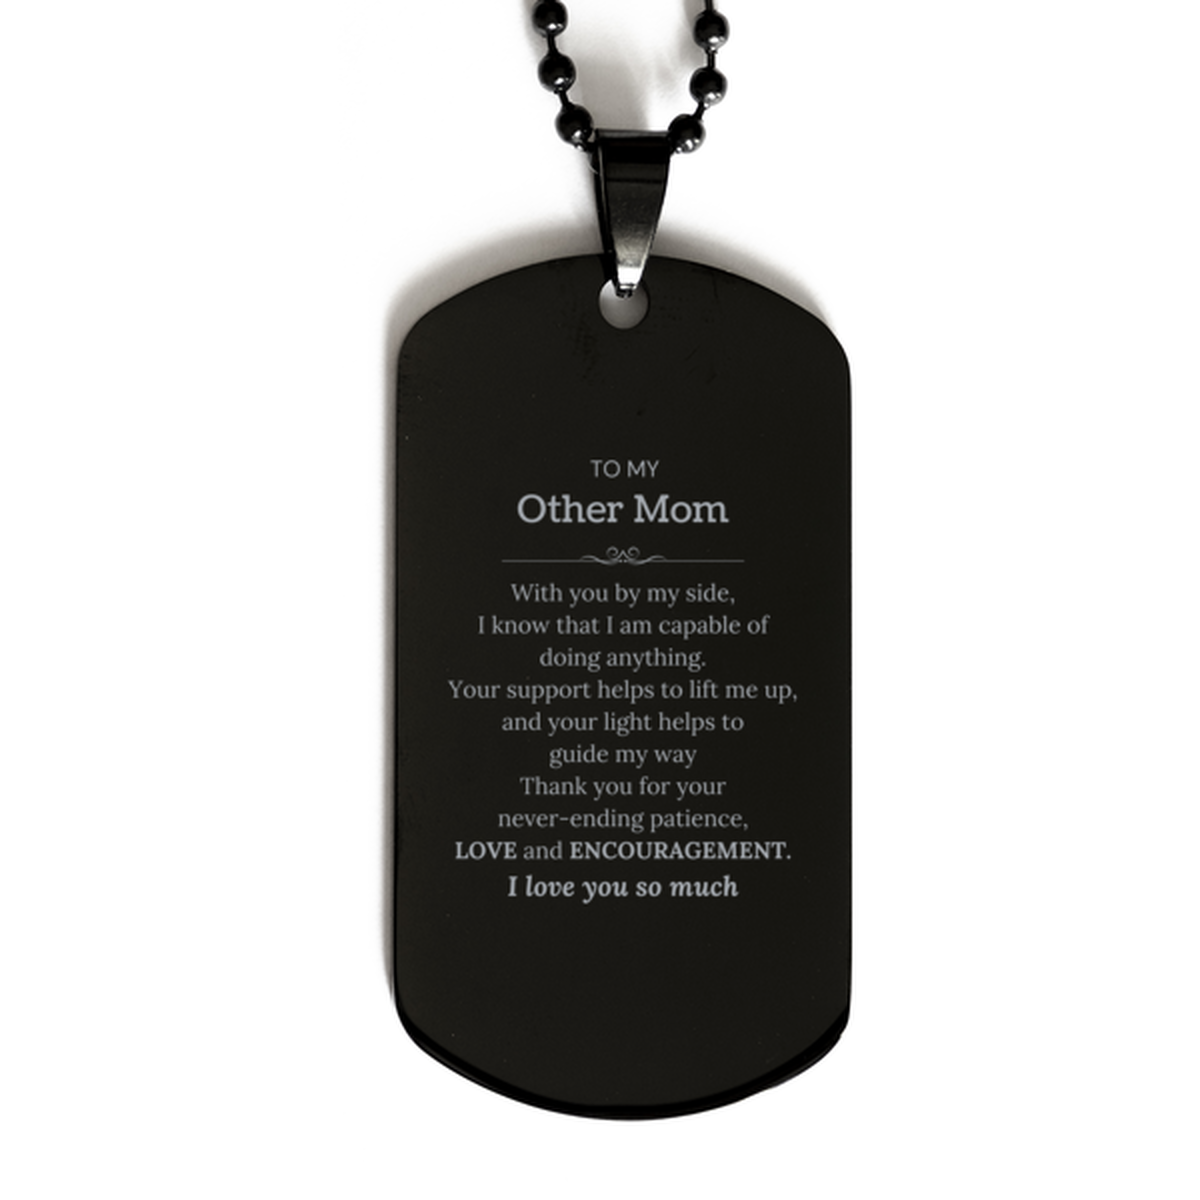 Appreciation Other Mom Black Dog Tag Gifts, To My Other Mom Birthday Christmas Wedding Keepsake Gifts for Other Mom With you by my side, I know that I am capable of doing anything. I love you so much